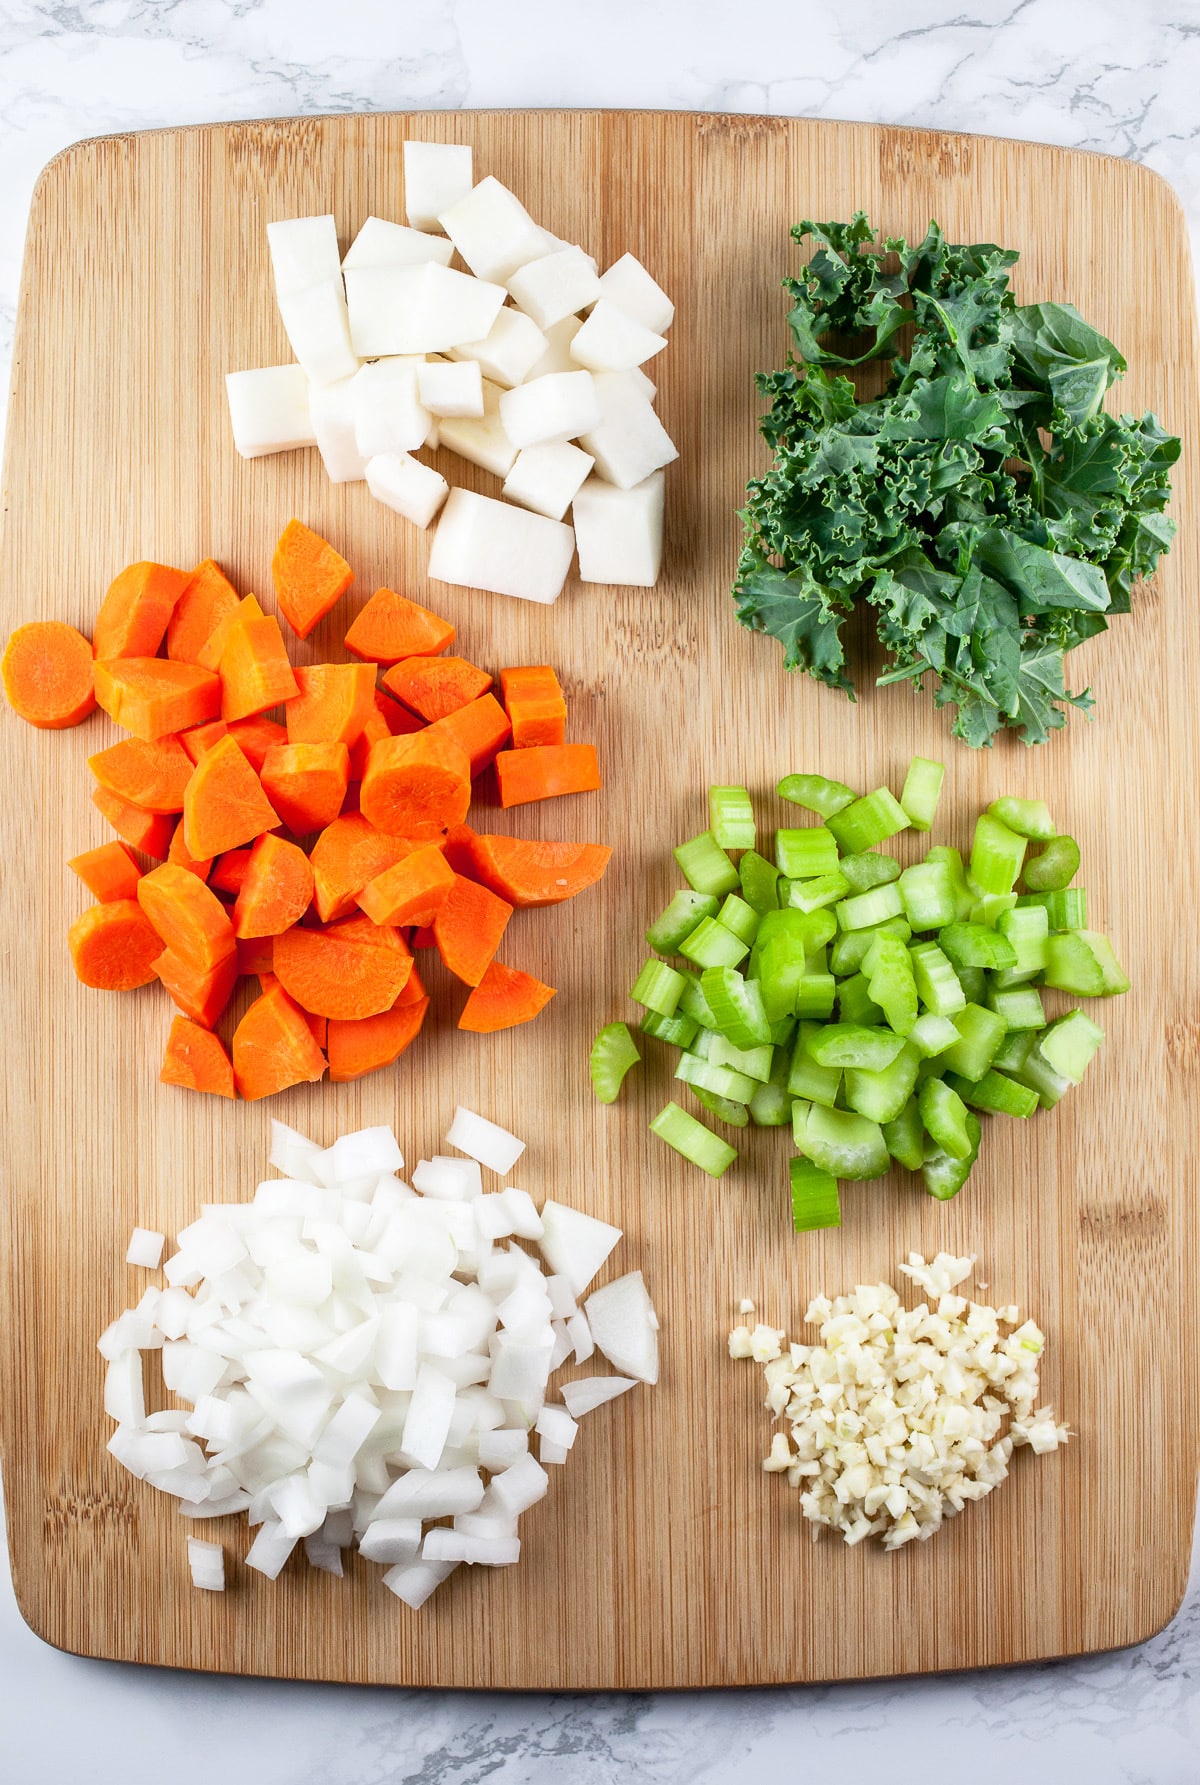 Minced garlic and onions, chopped carrots, celery, turnips, and kale on wooden cutting board.